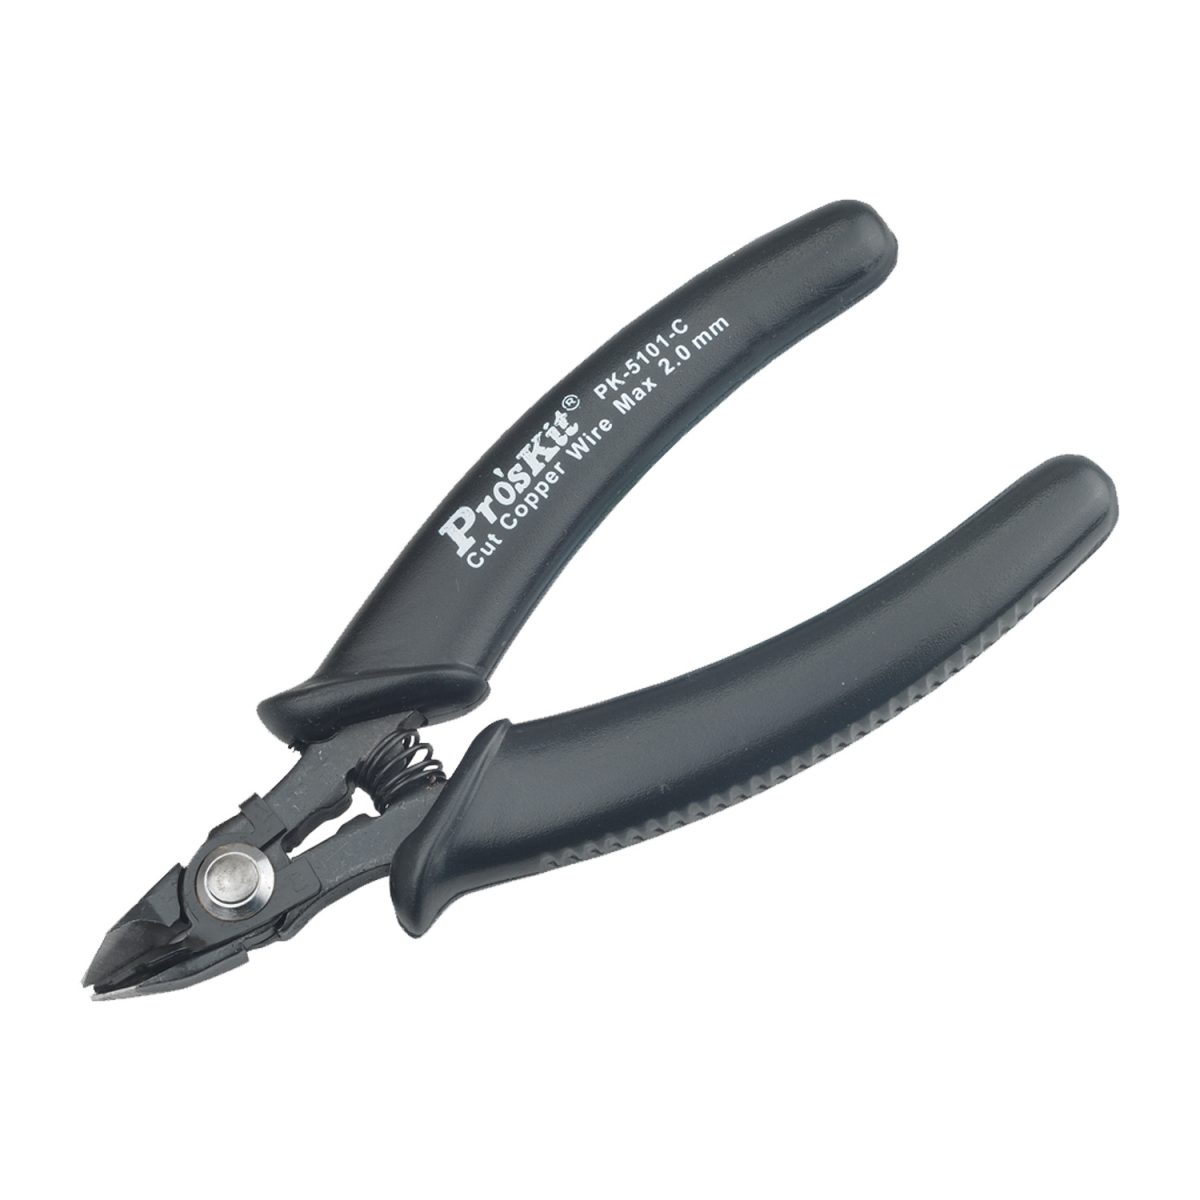 Pro'sKit 1PK-5101-C Heavy Duty Cutting Plier With Safety Clip